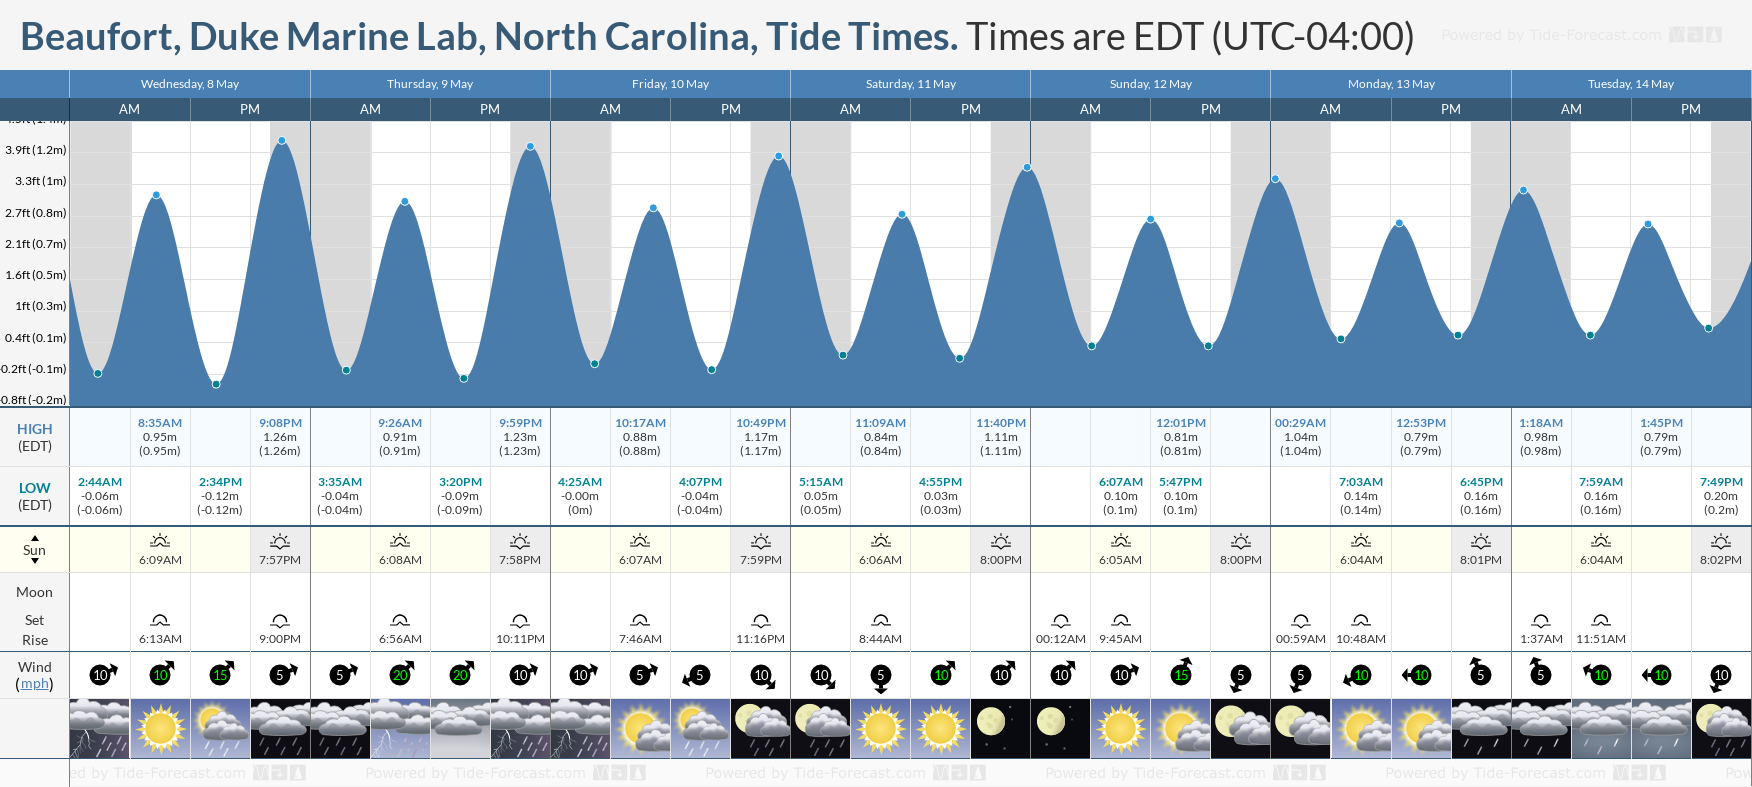 Beaufort, Duke Marine Lab, North Carolina Tide Chart including high and low tide tide times for the next 7 days